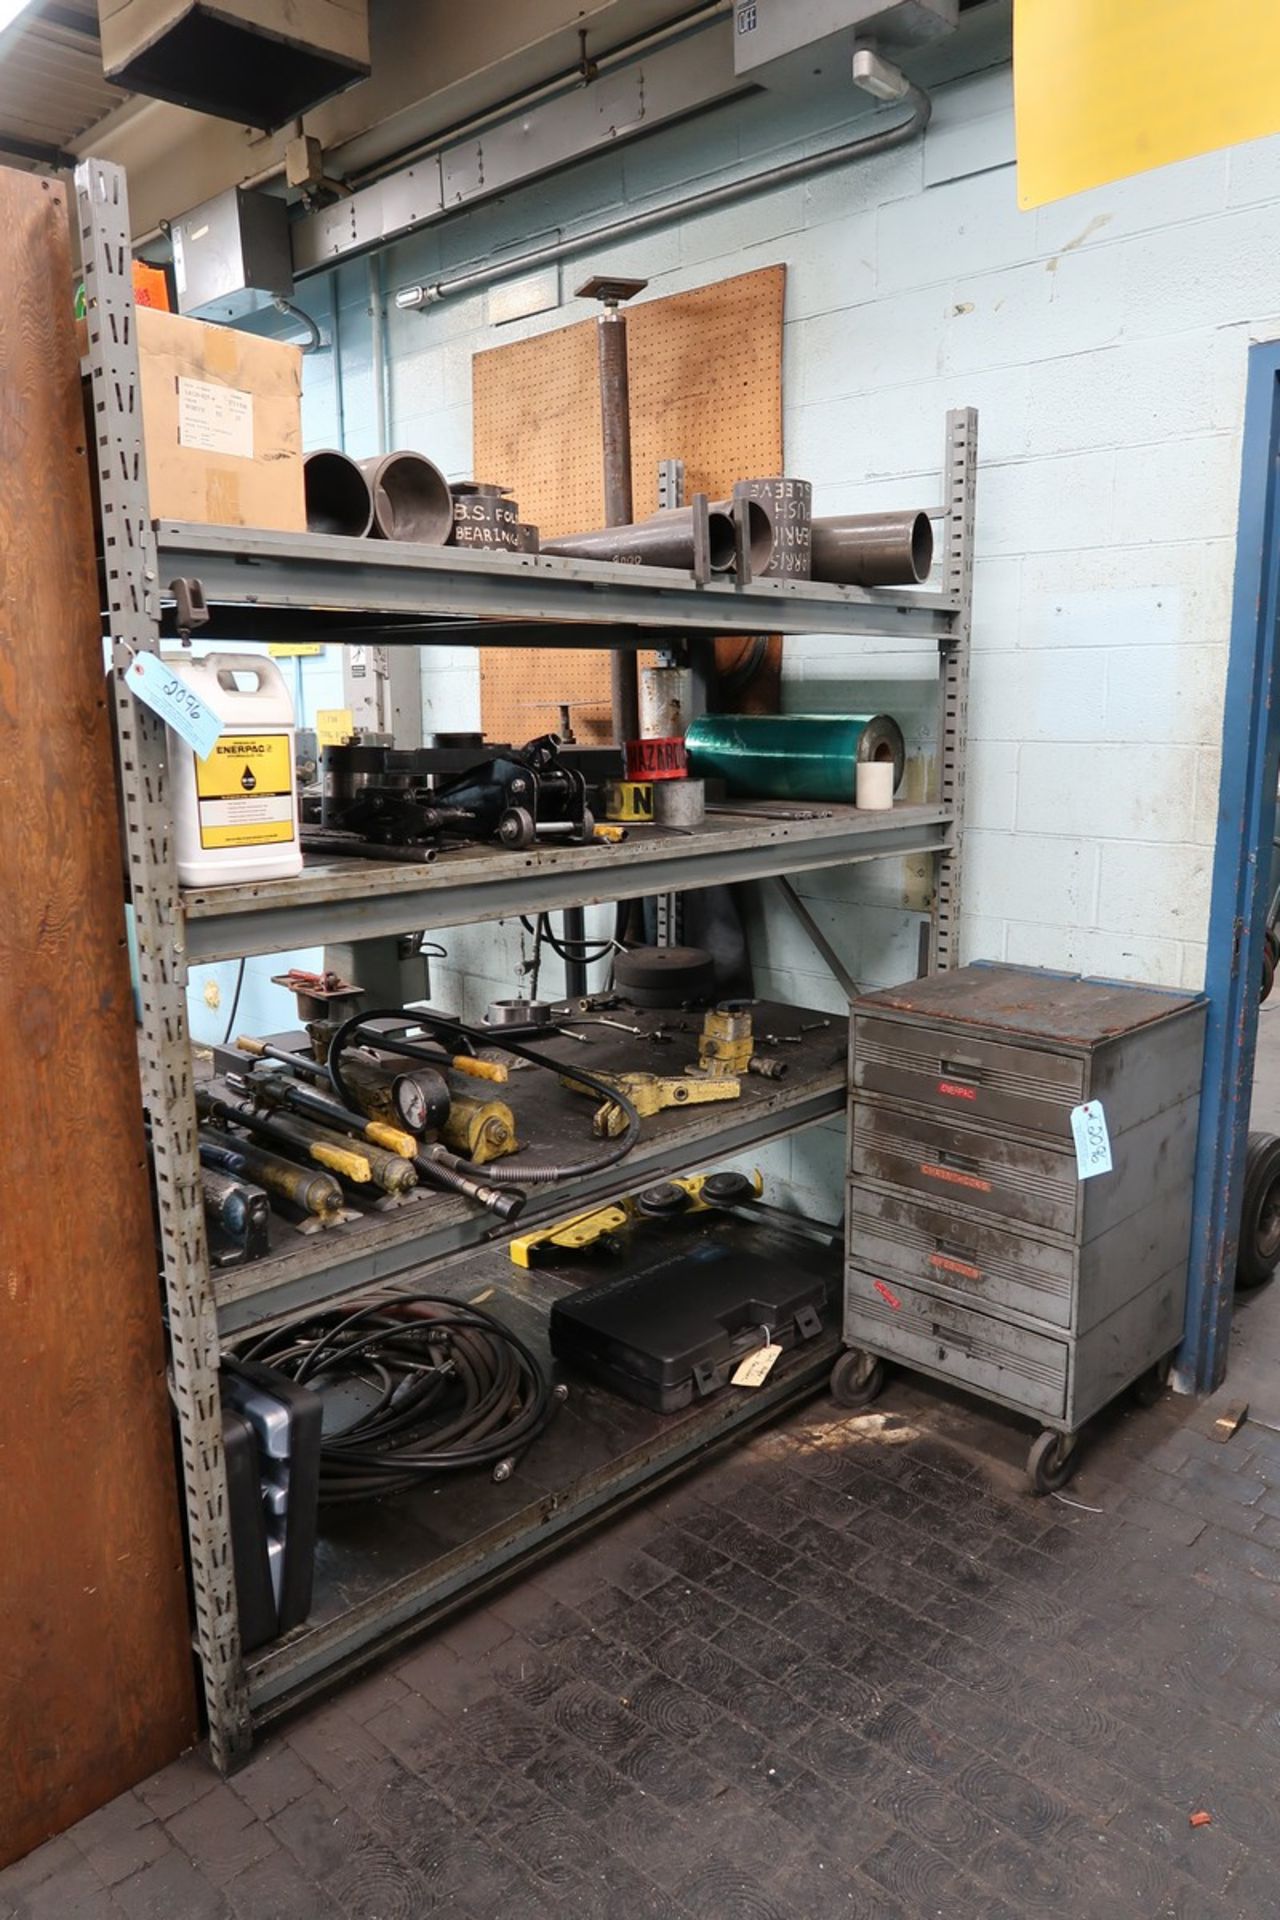 Section of Heavy Duty Adjustable Shelving with Contents of Hydraulic Components